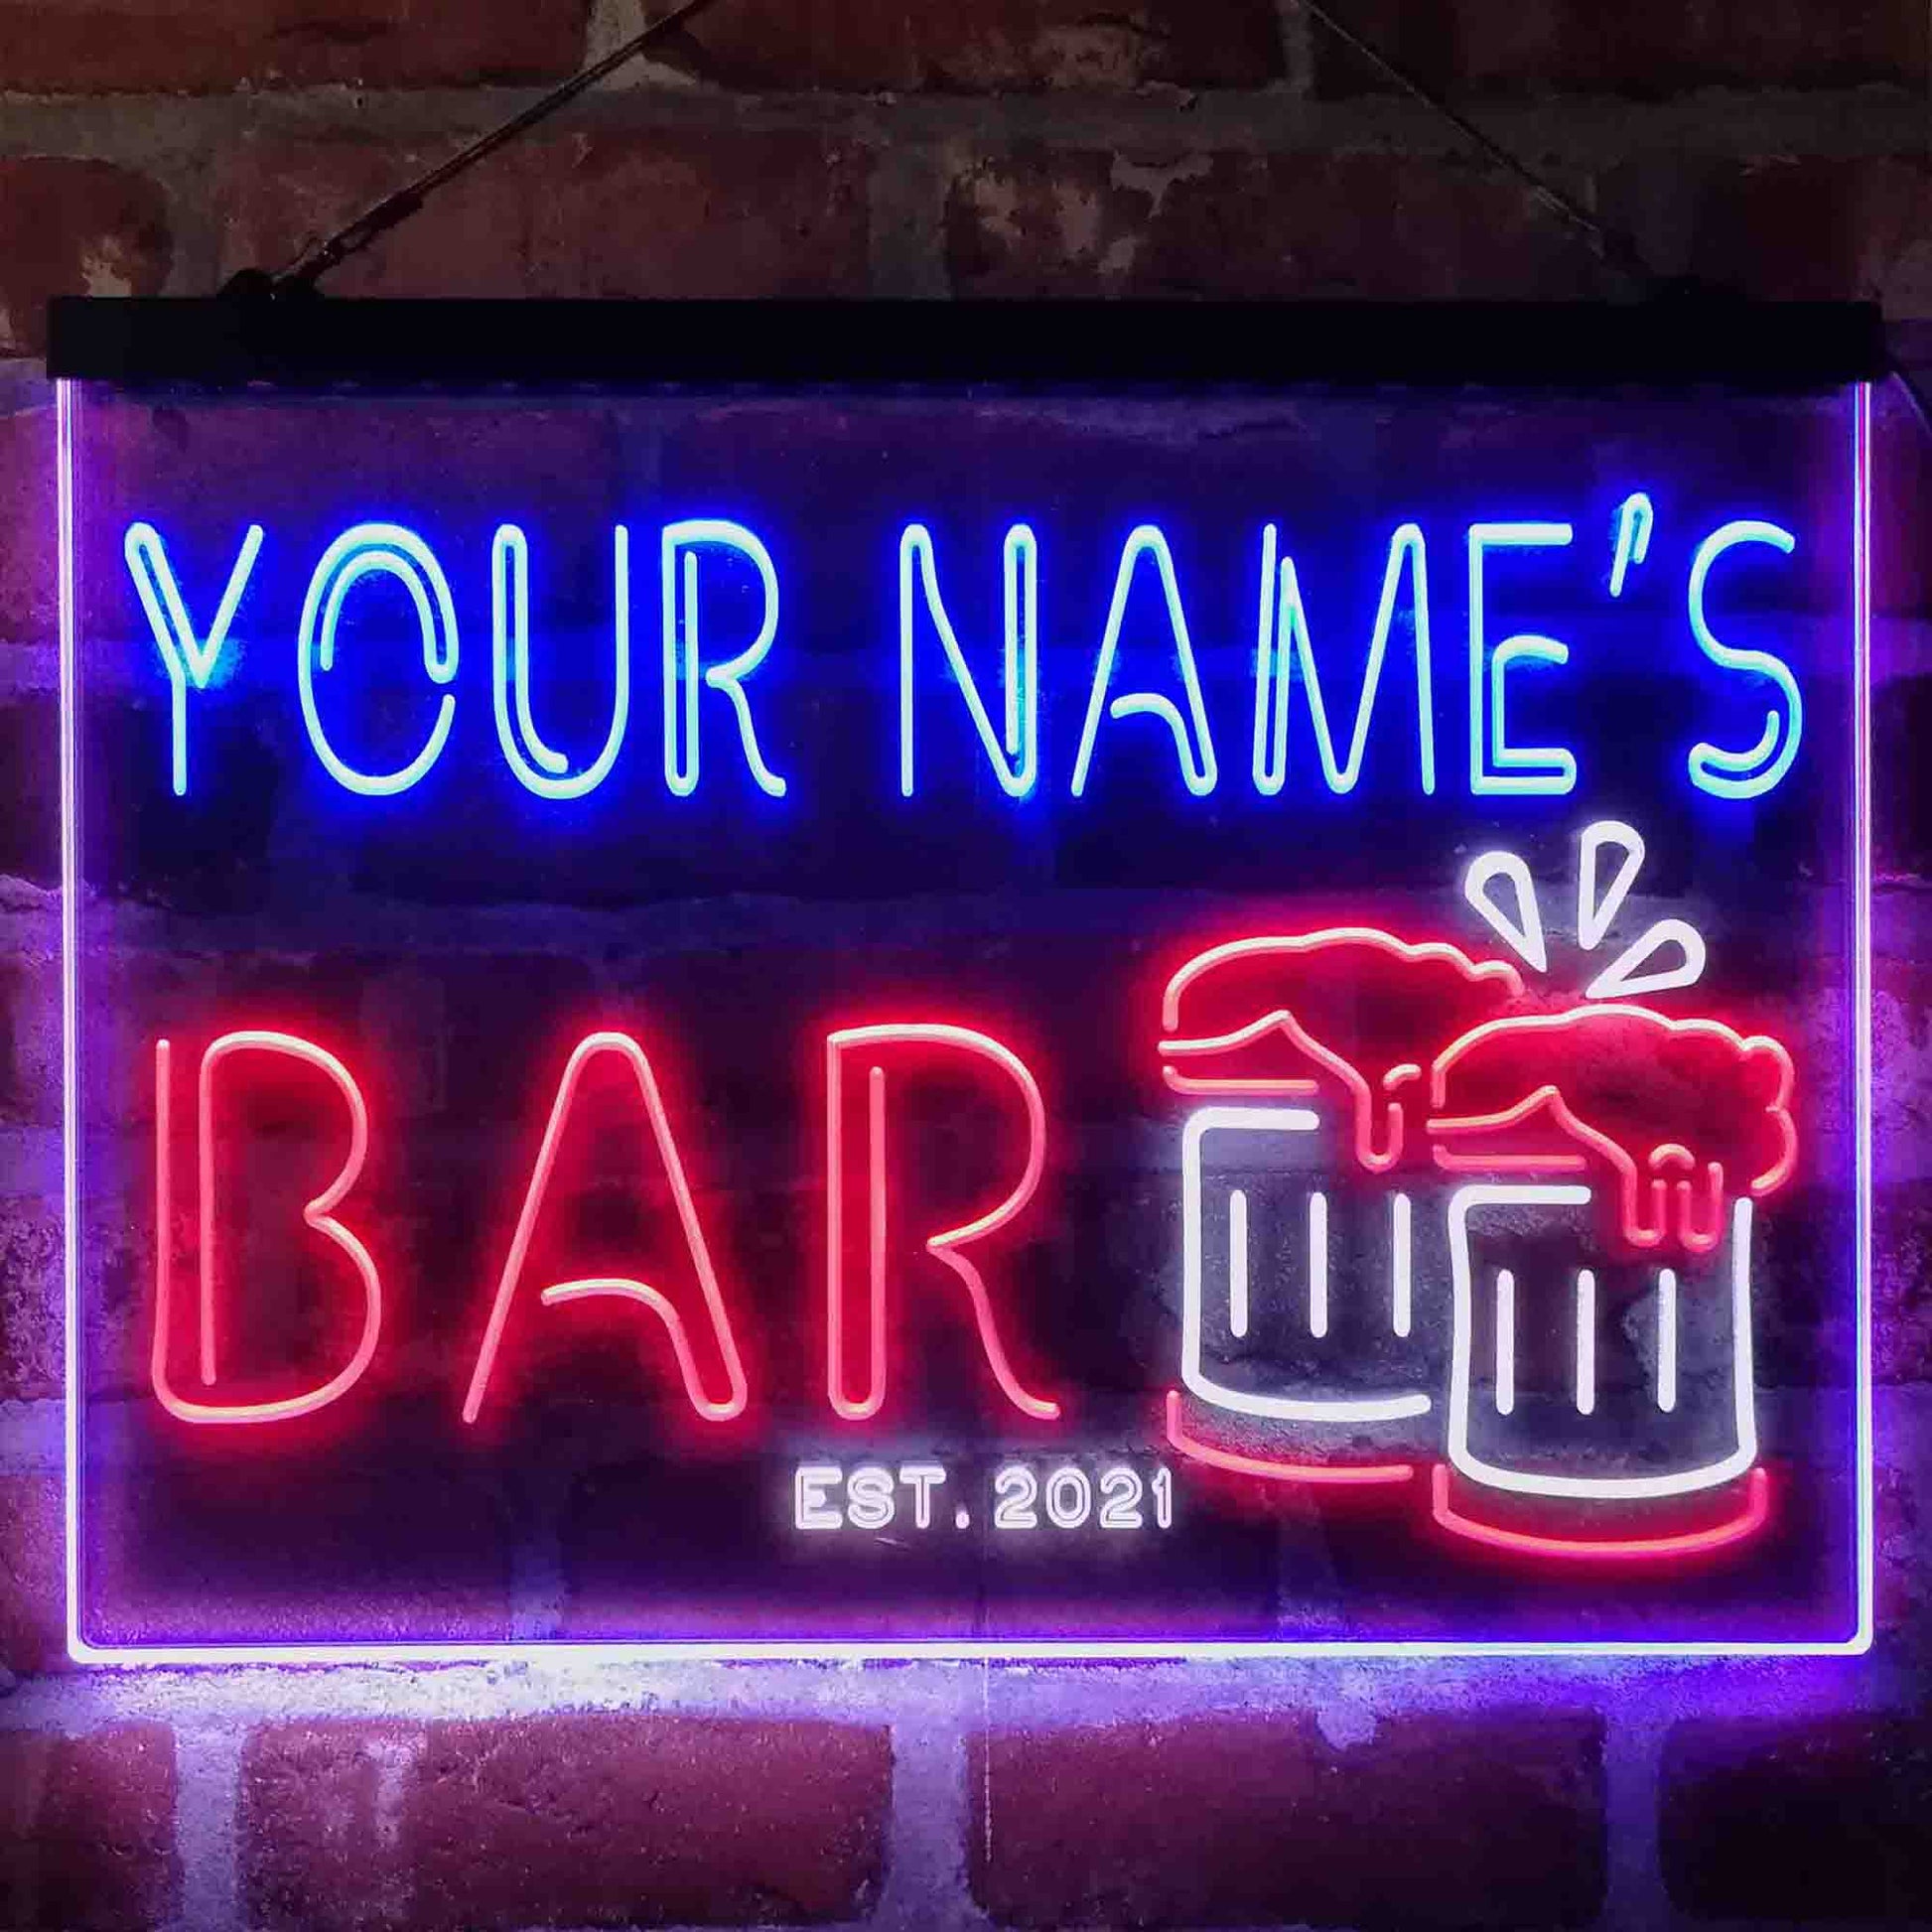 Personalized Beer Mug Decoration 3-Color LED Neon Light Sign - Way Up Gifts